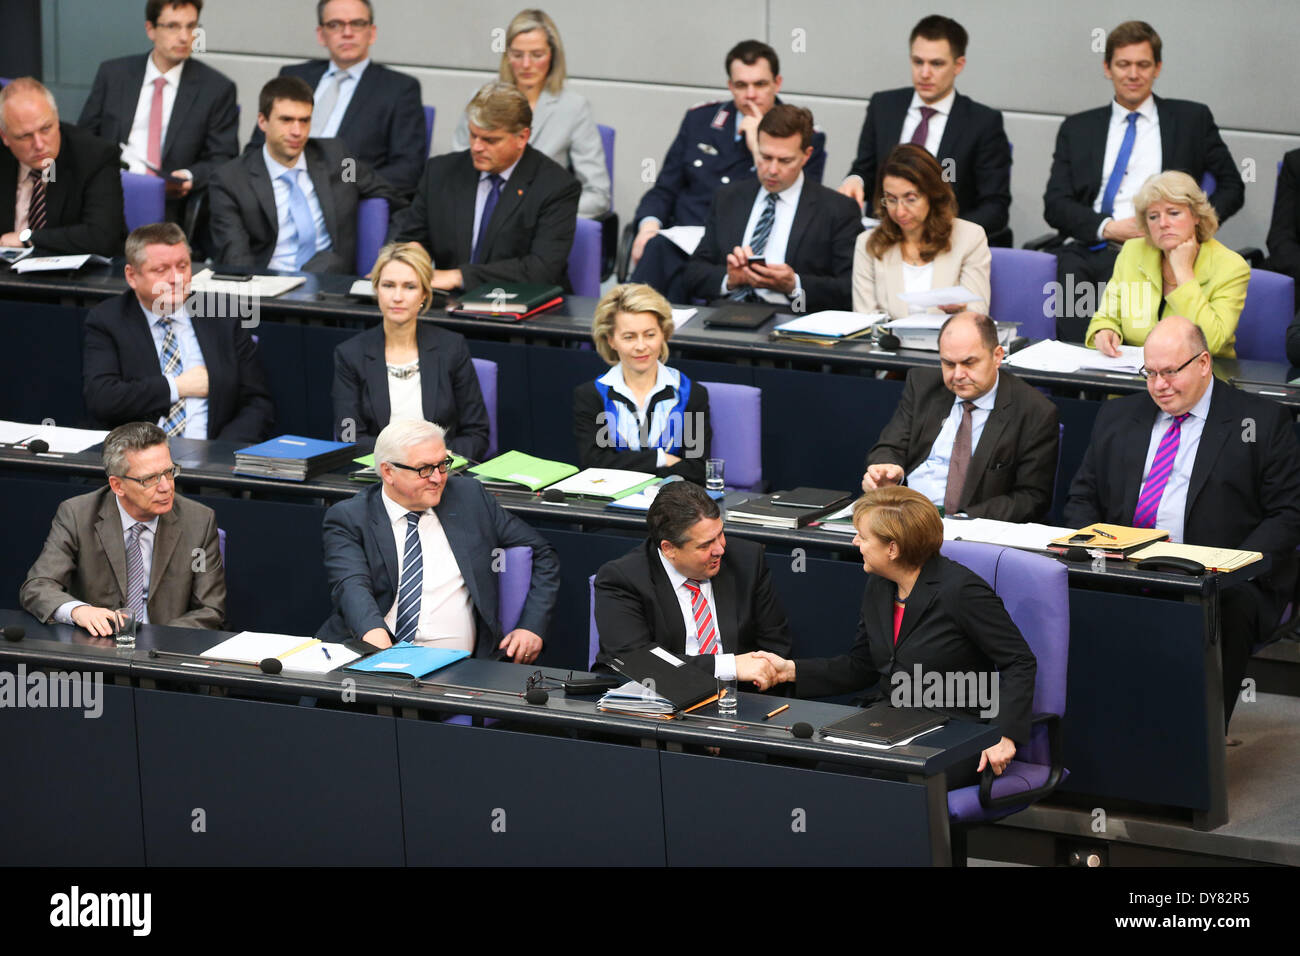 Berlin, Germany. 9th Apr, 2014. German Chancellor Angela Merkel (1st R Front) reacts after her speech during a debate on the 2014 federal budget at the Bundestag, the lower house of parliament, in Berlin, Germany, on April 9, 2014. Credit:  Zhang Fan/Xinhua/Alamy Live News Stock Photo